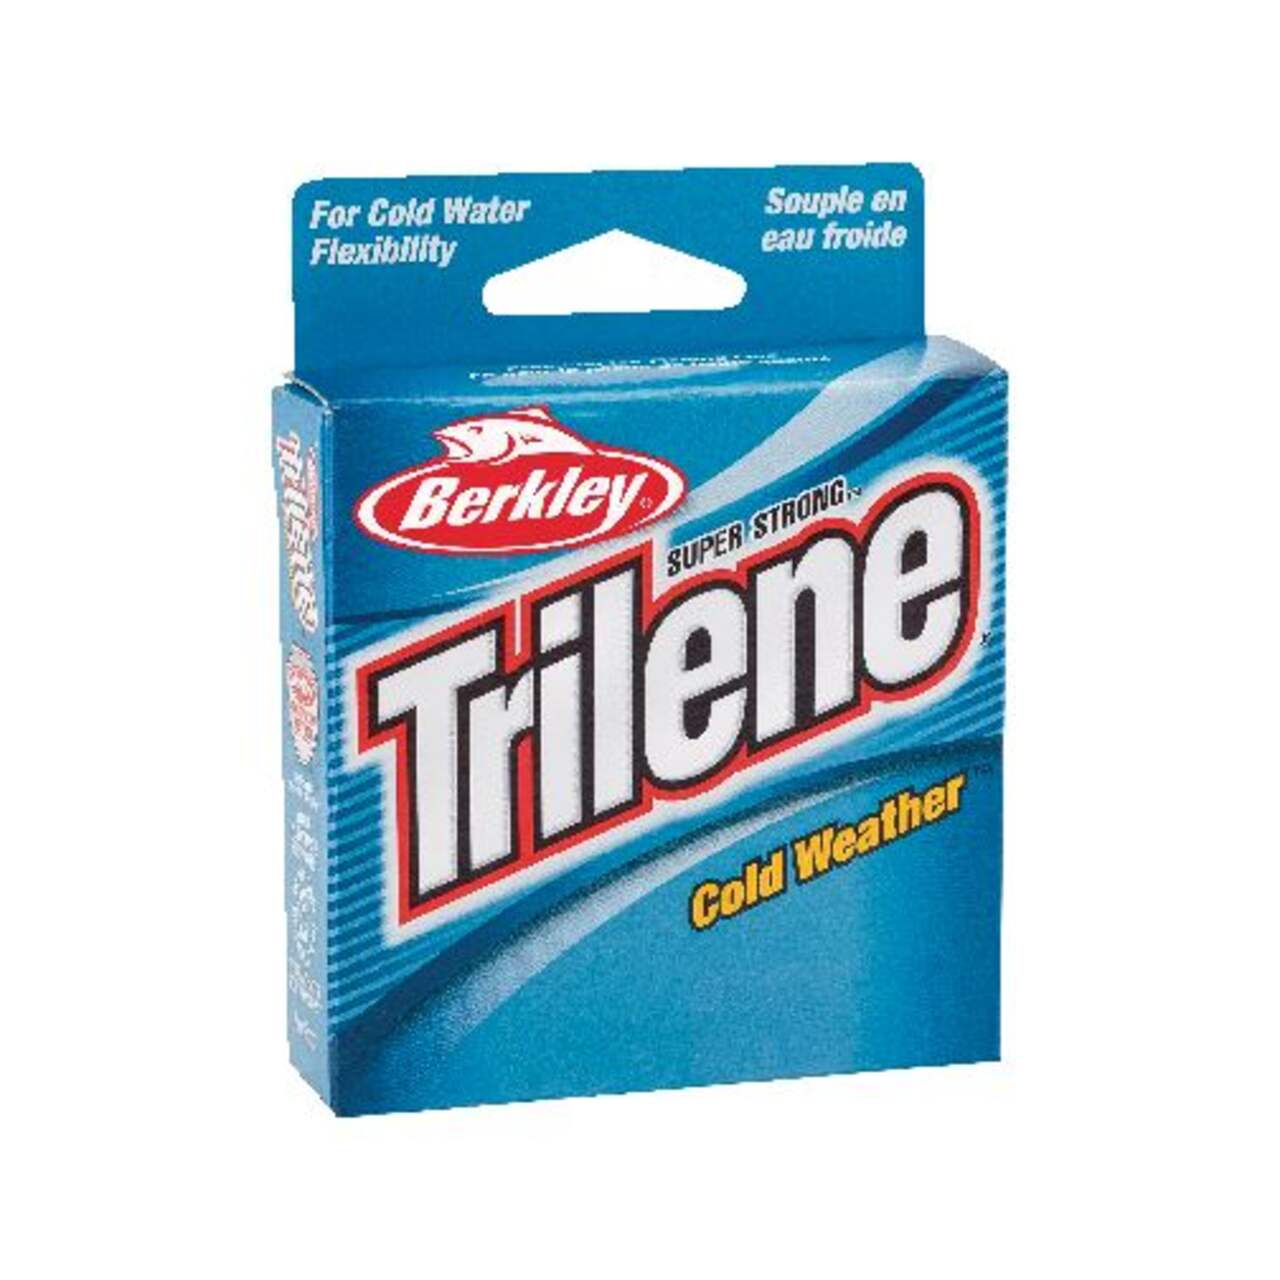 Berkley Ice Fishing Cold Weather Fishing Line, Clear/Blue